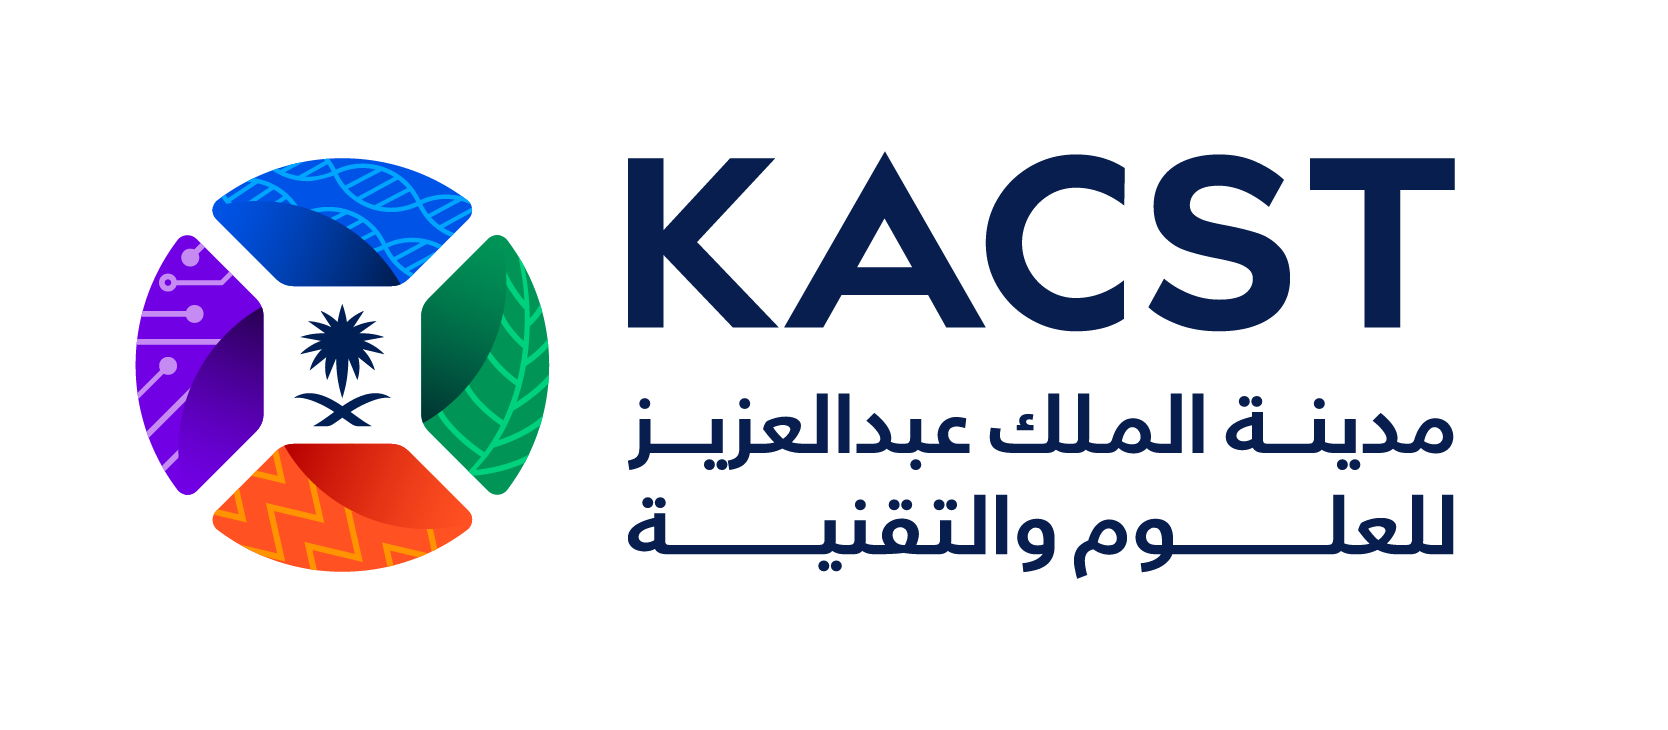 KACST Logo - circular symbol with colors red, blue, purple and green and name text